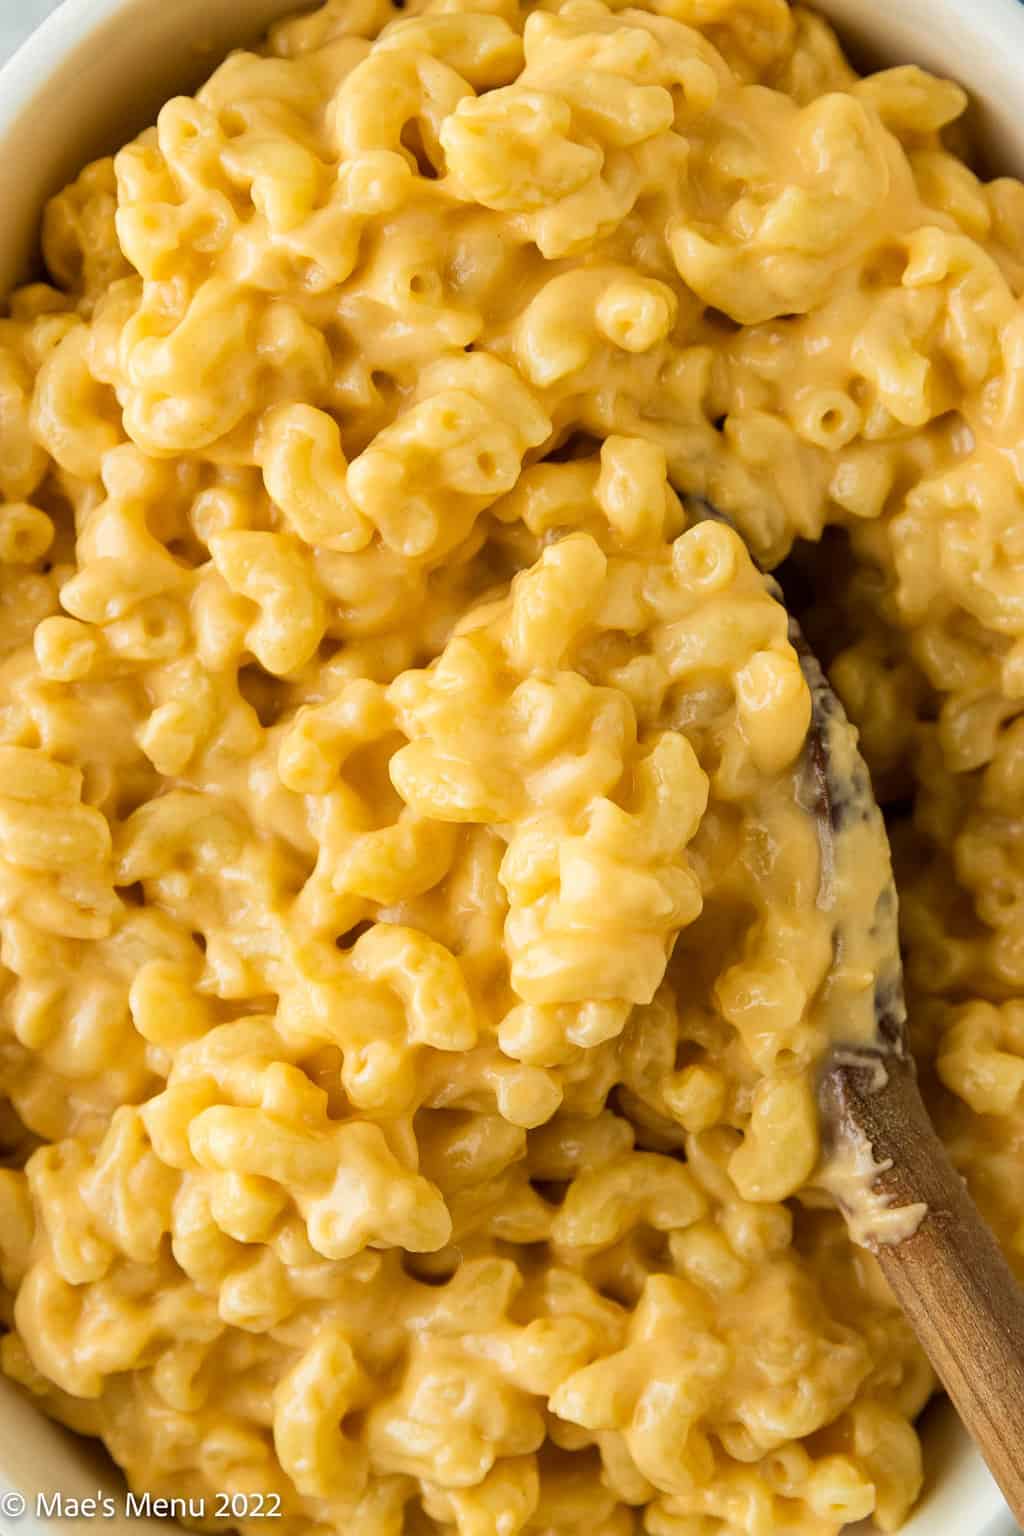 An up-close overhead shot of a white bowl of Mac and cheese.